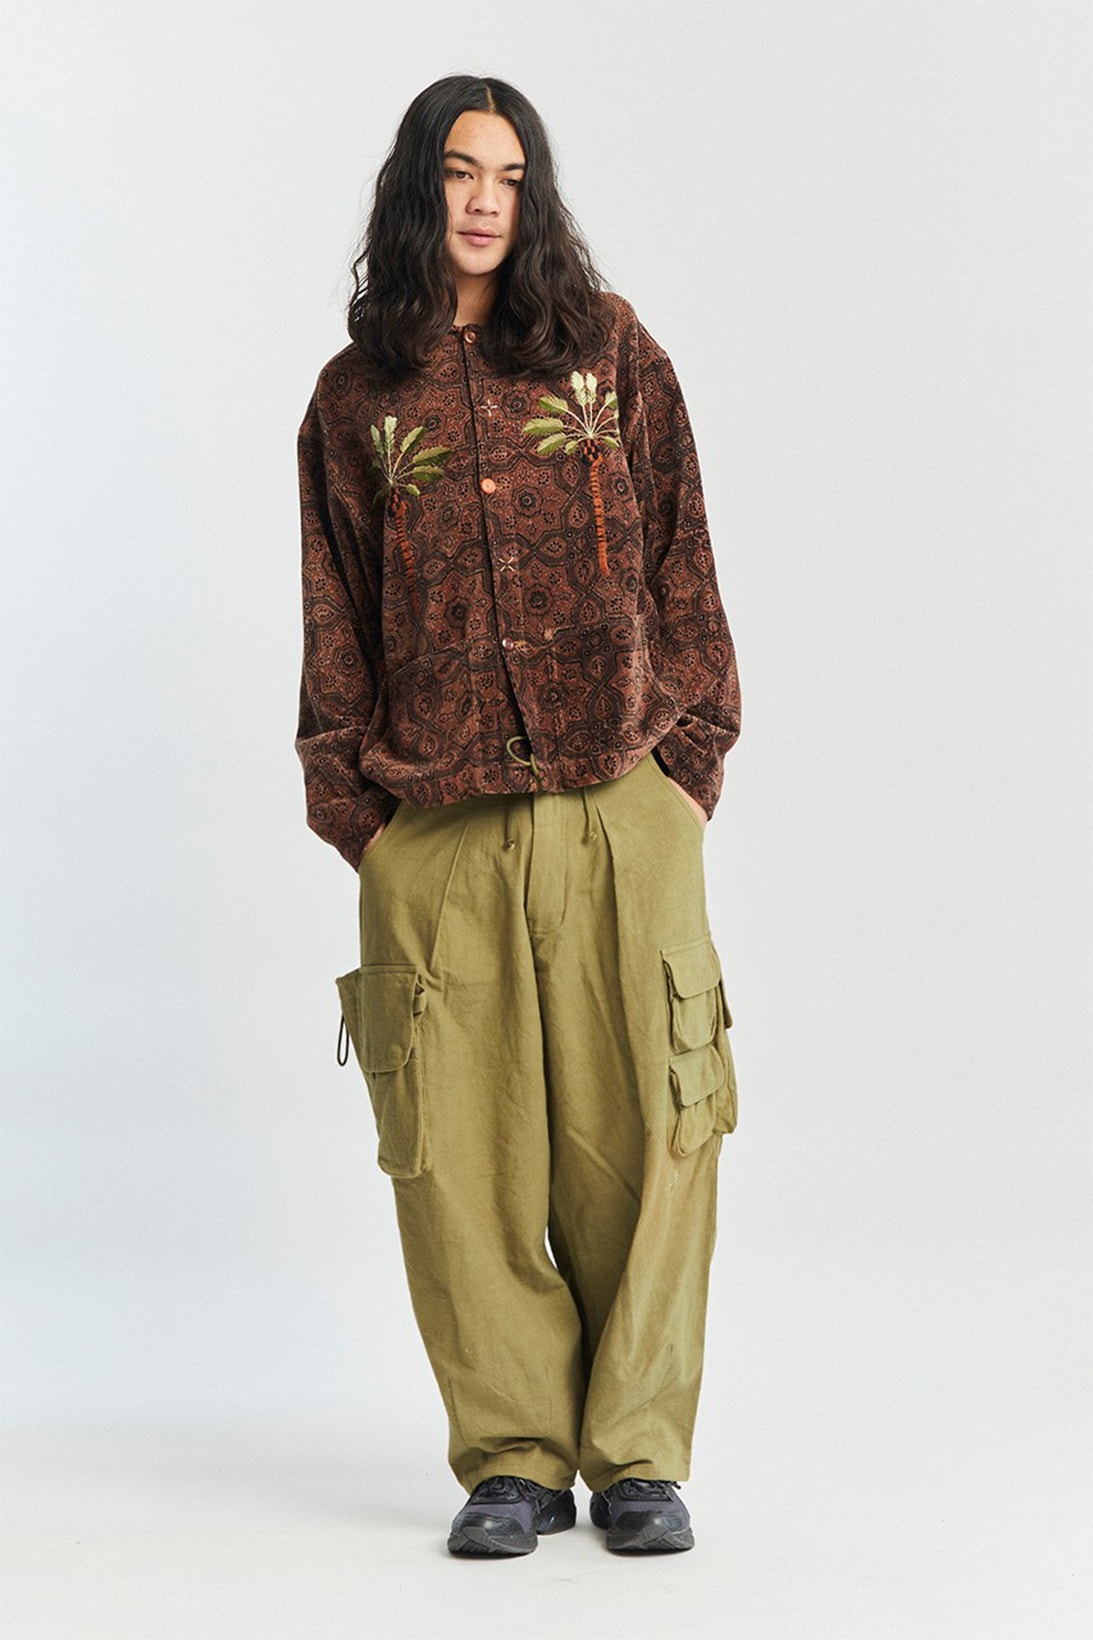 Story Mfg. Try Try Try Fall Winter Collection Lookbook Shirt Pants Brown Green